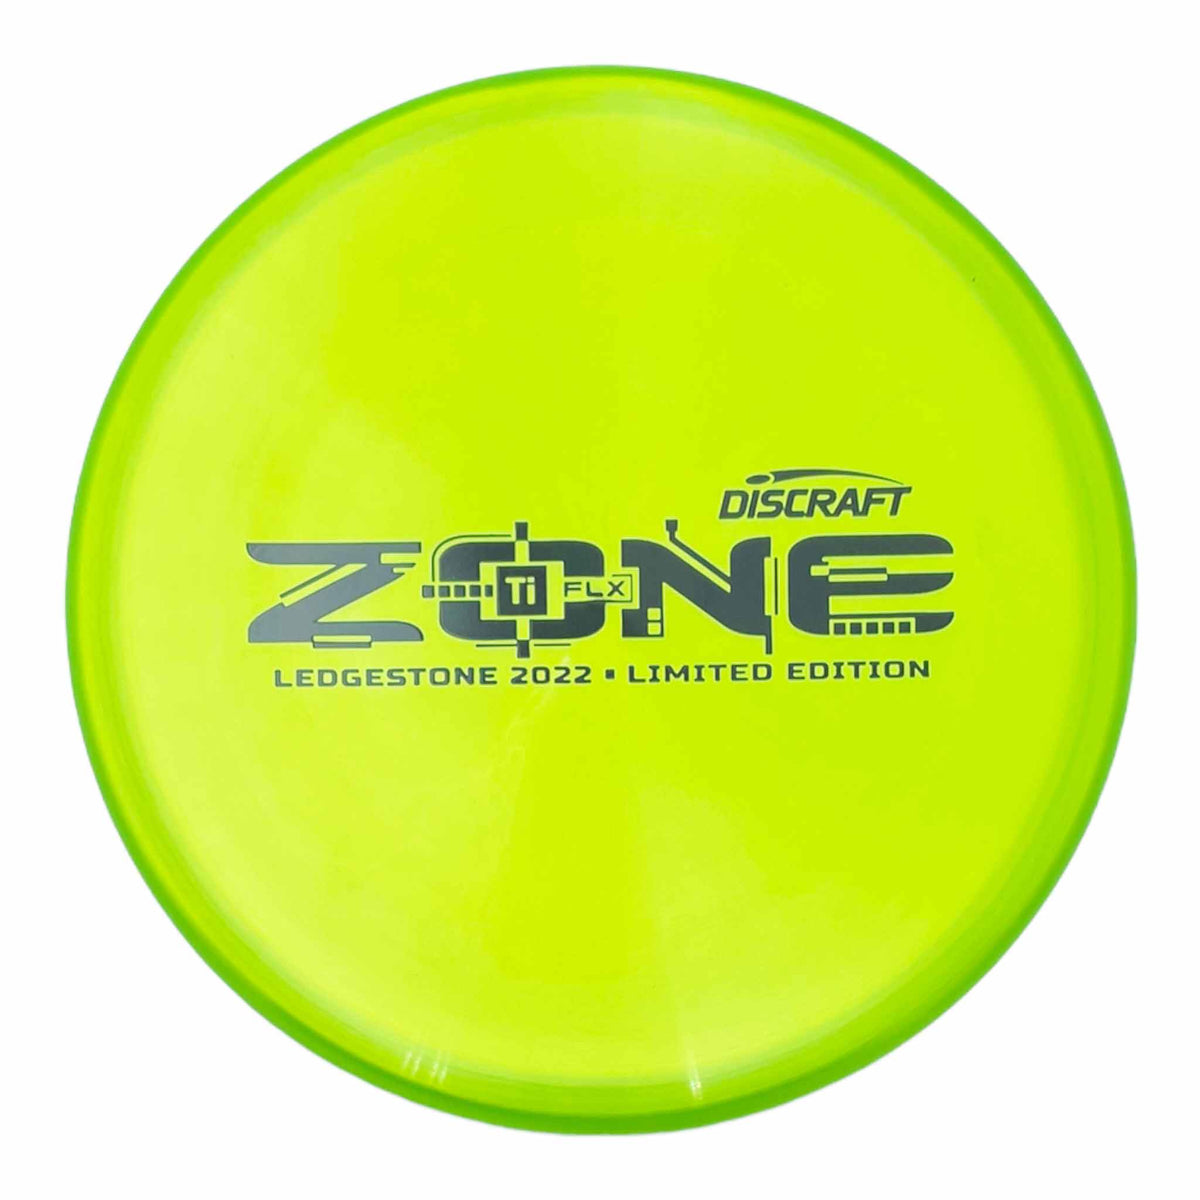 Discraft 2022 Ledgestione Limited Edition Ti FLX Zone putter and approach - Green / Black